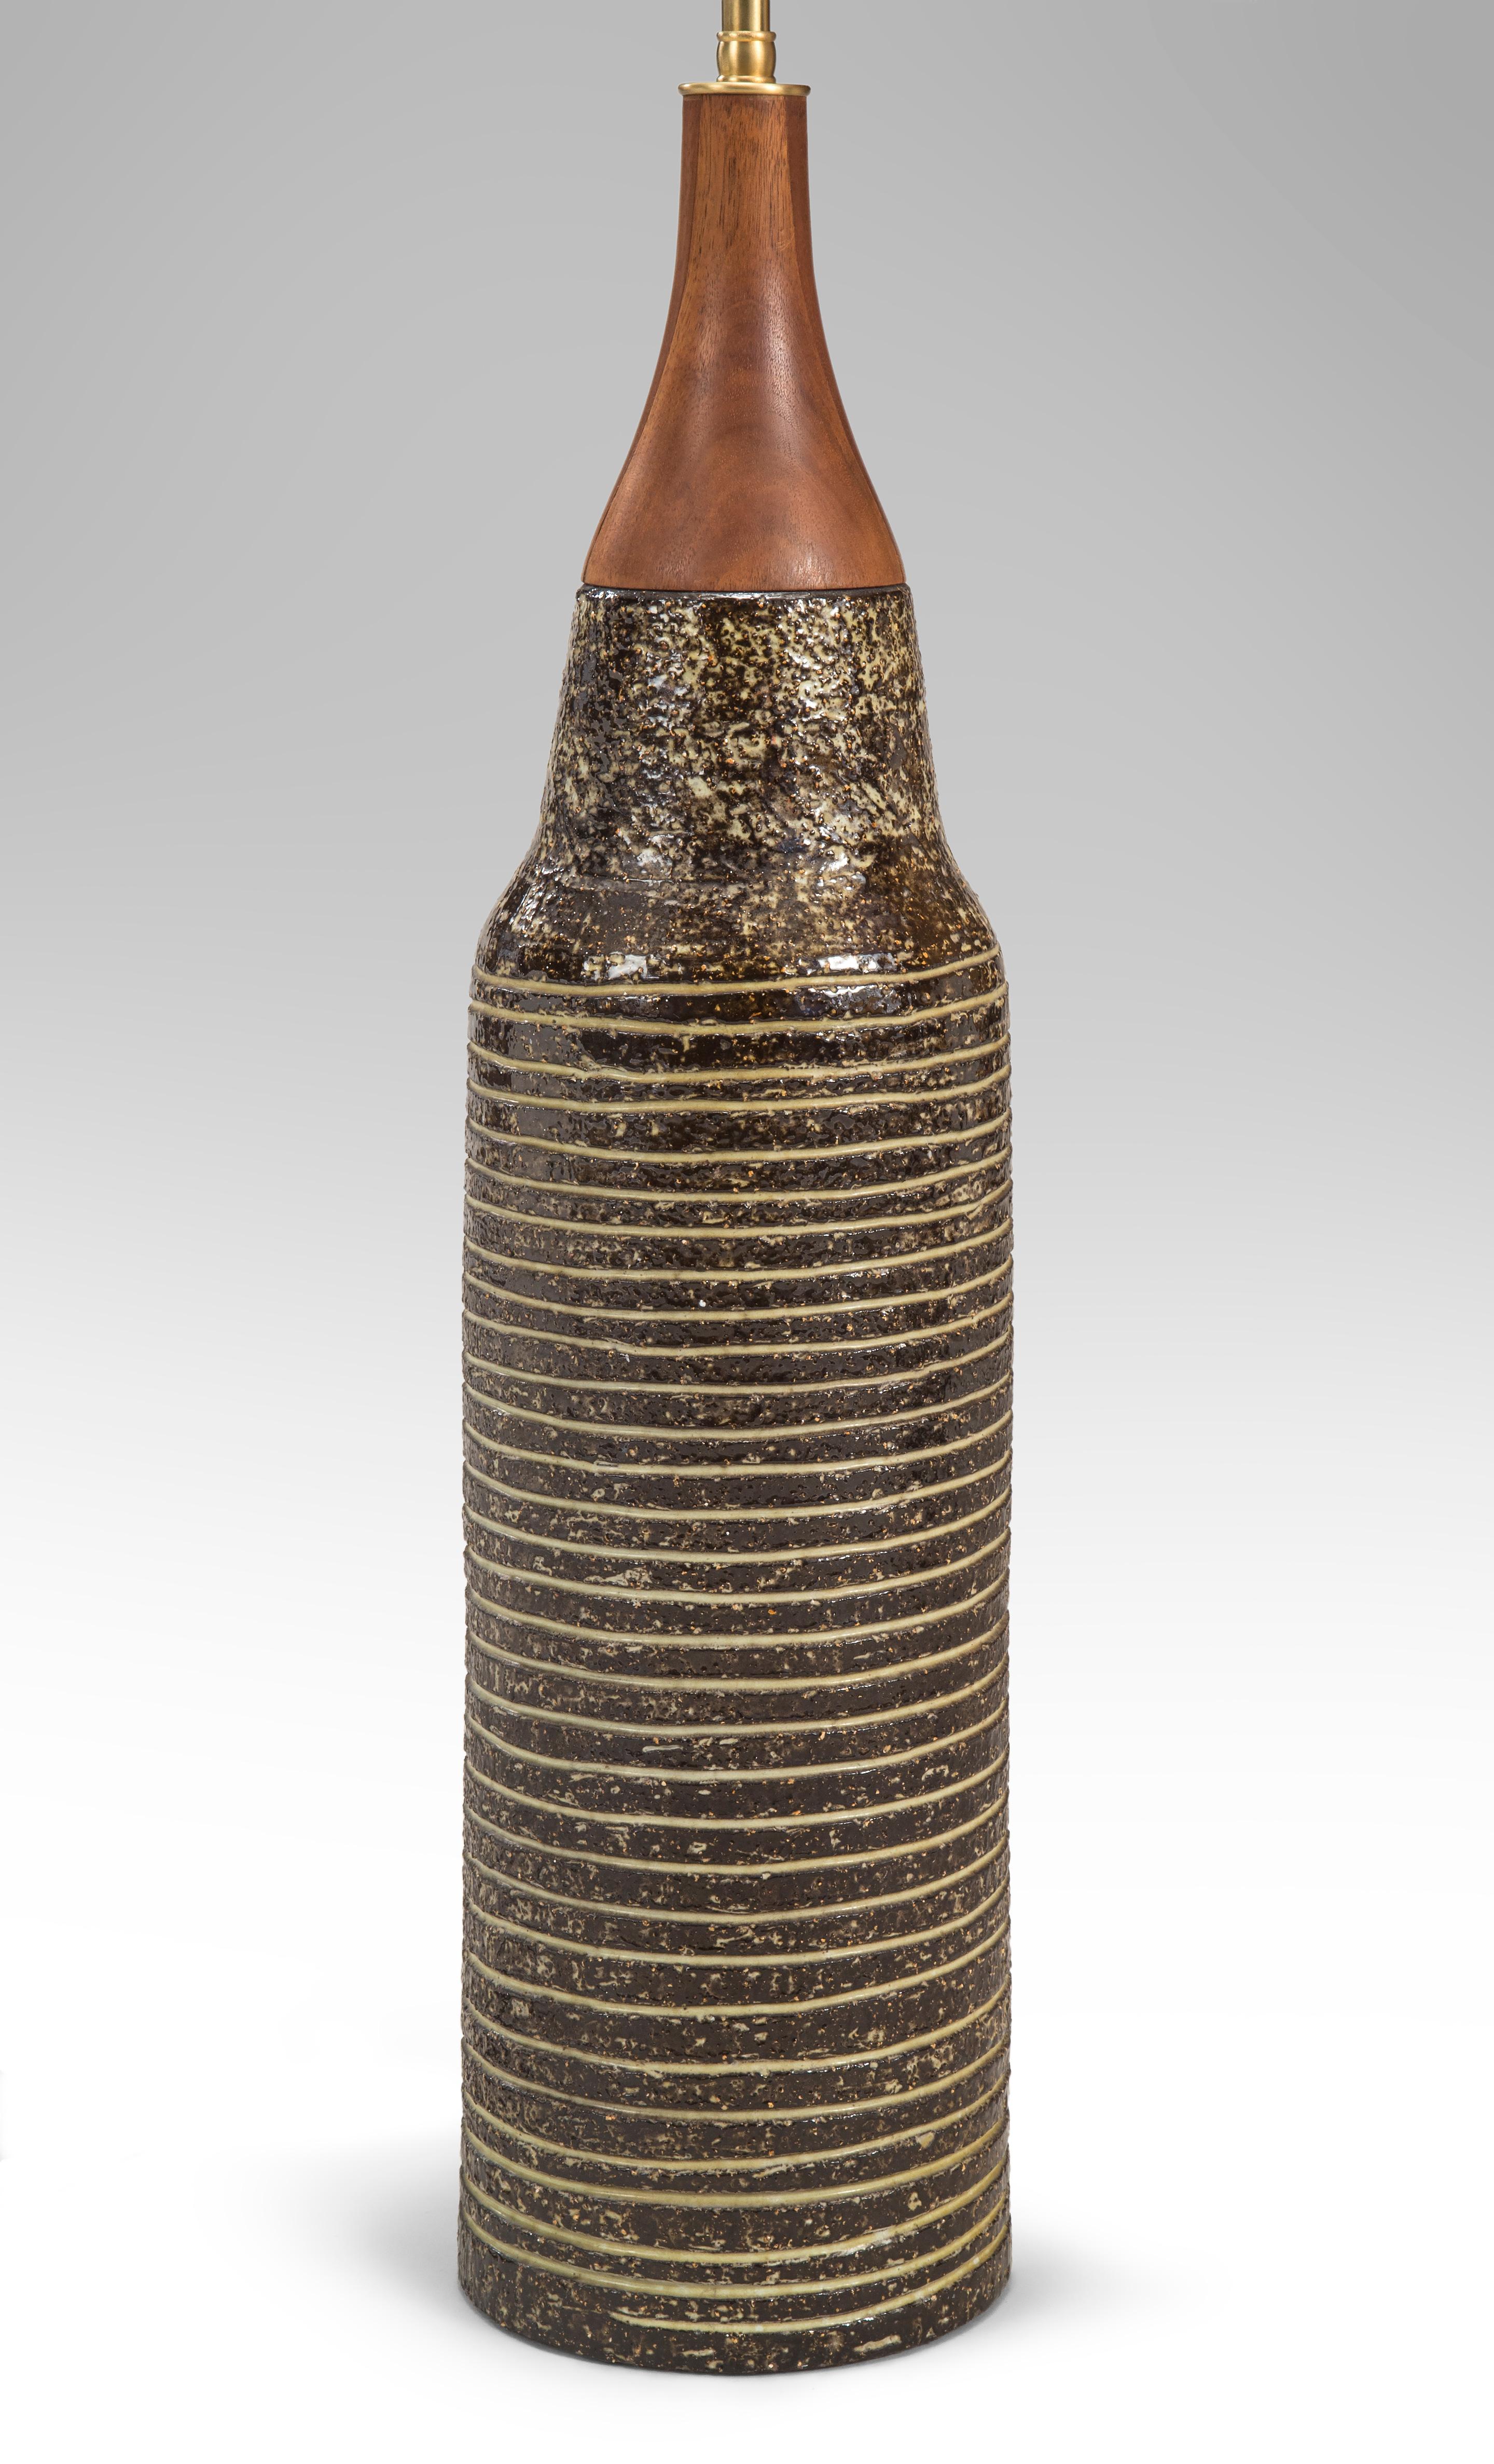 Upsala-Ekeby, Swedish Stoneware lamp, Marked: UE Sweden 2432
circa 1970
A classic studio ceramic with a vibrant glaze and handsomely articulated form. The tapering wooden neck above the columnar body adorned with deeply cut concentric rings.